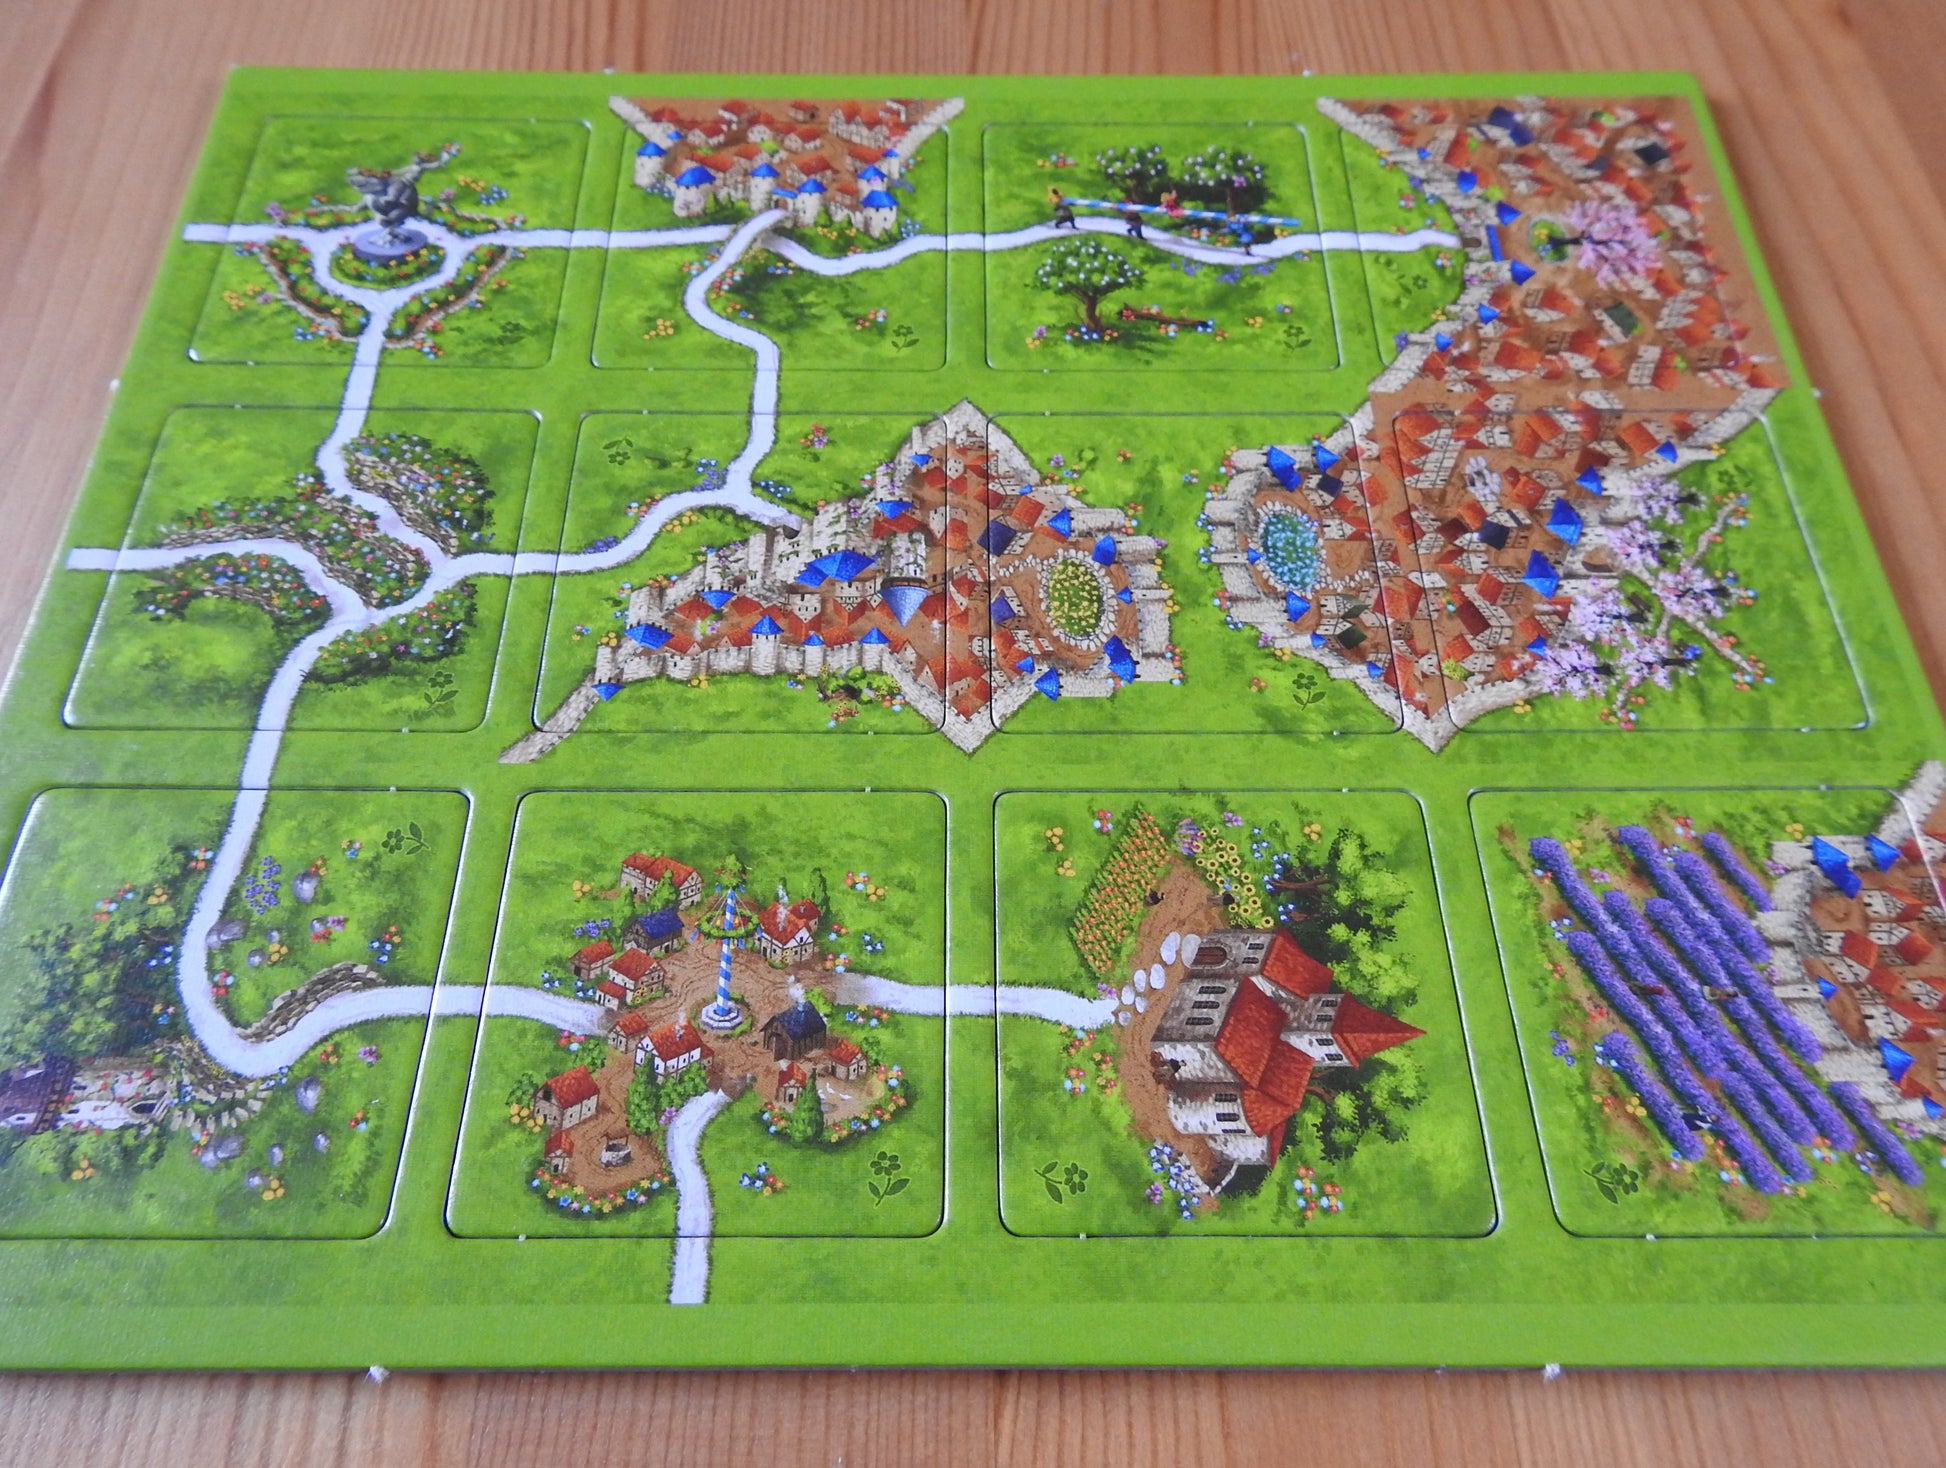 A view of all 12 of the included tiles from a lower angle in this Spring mini expansion for Carcassonne.